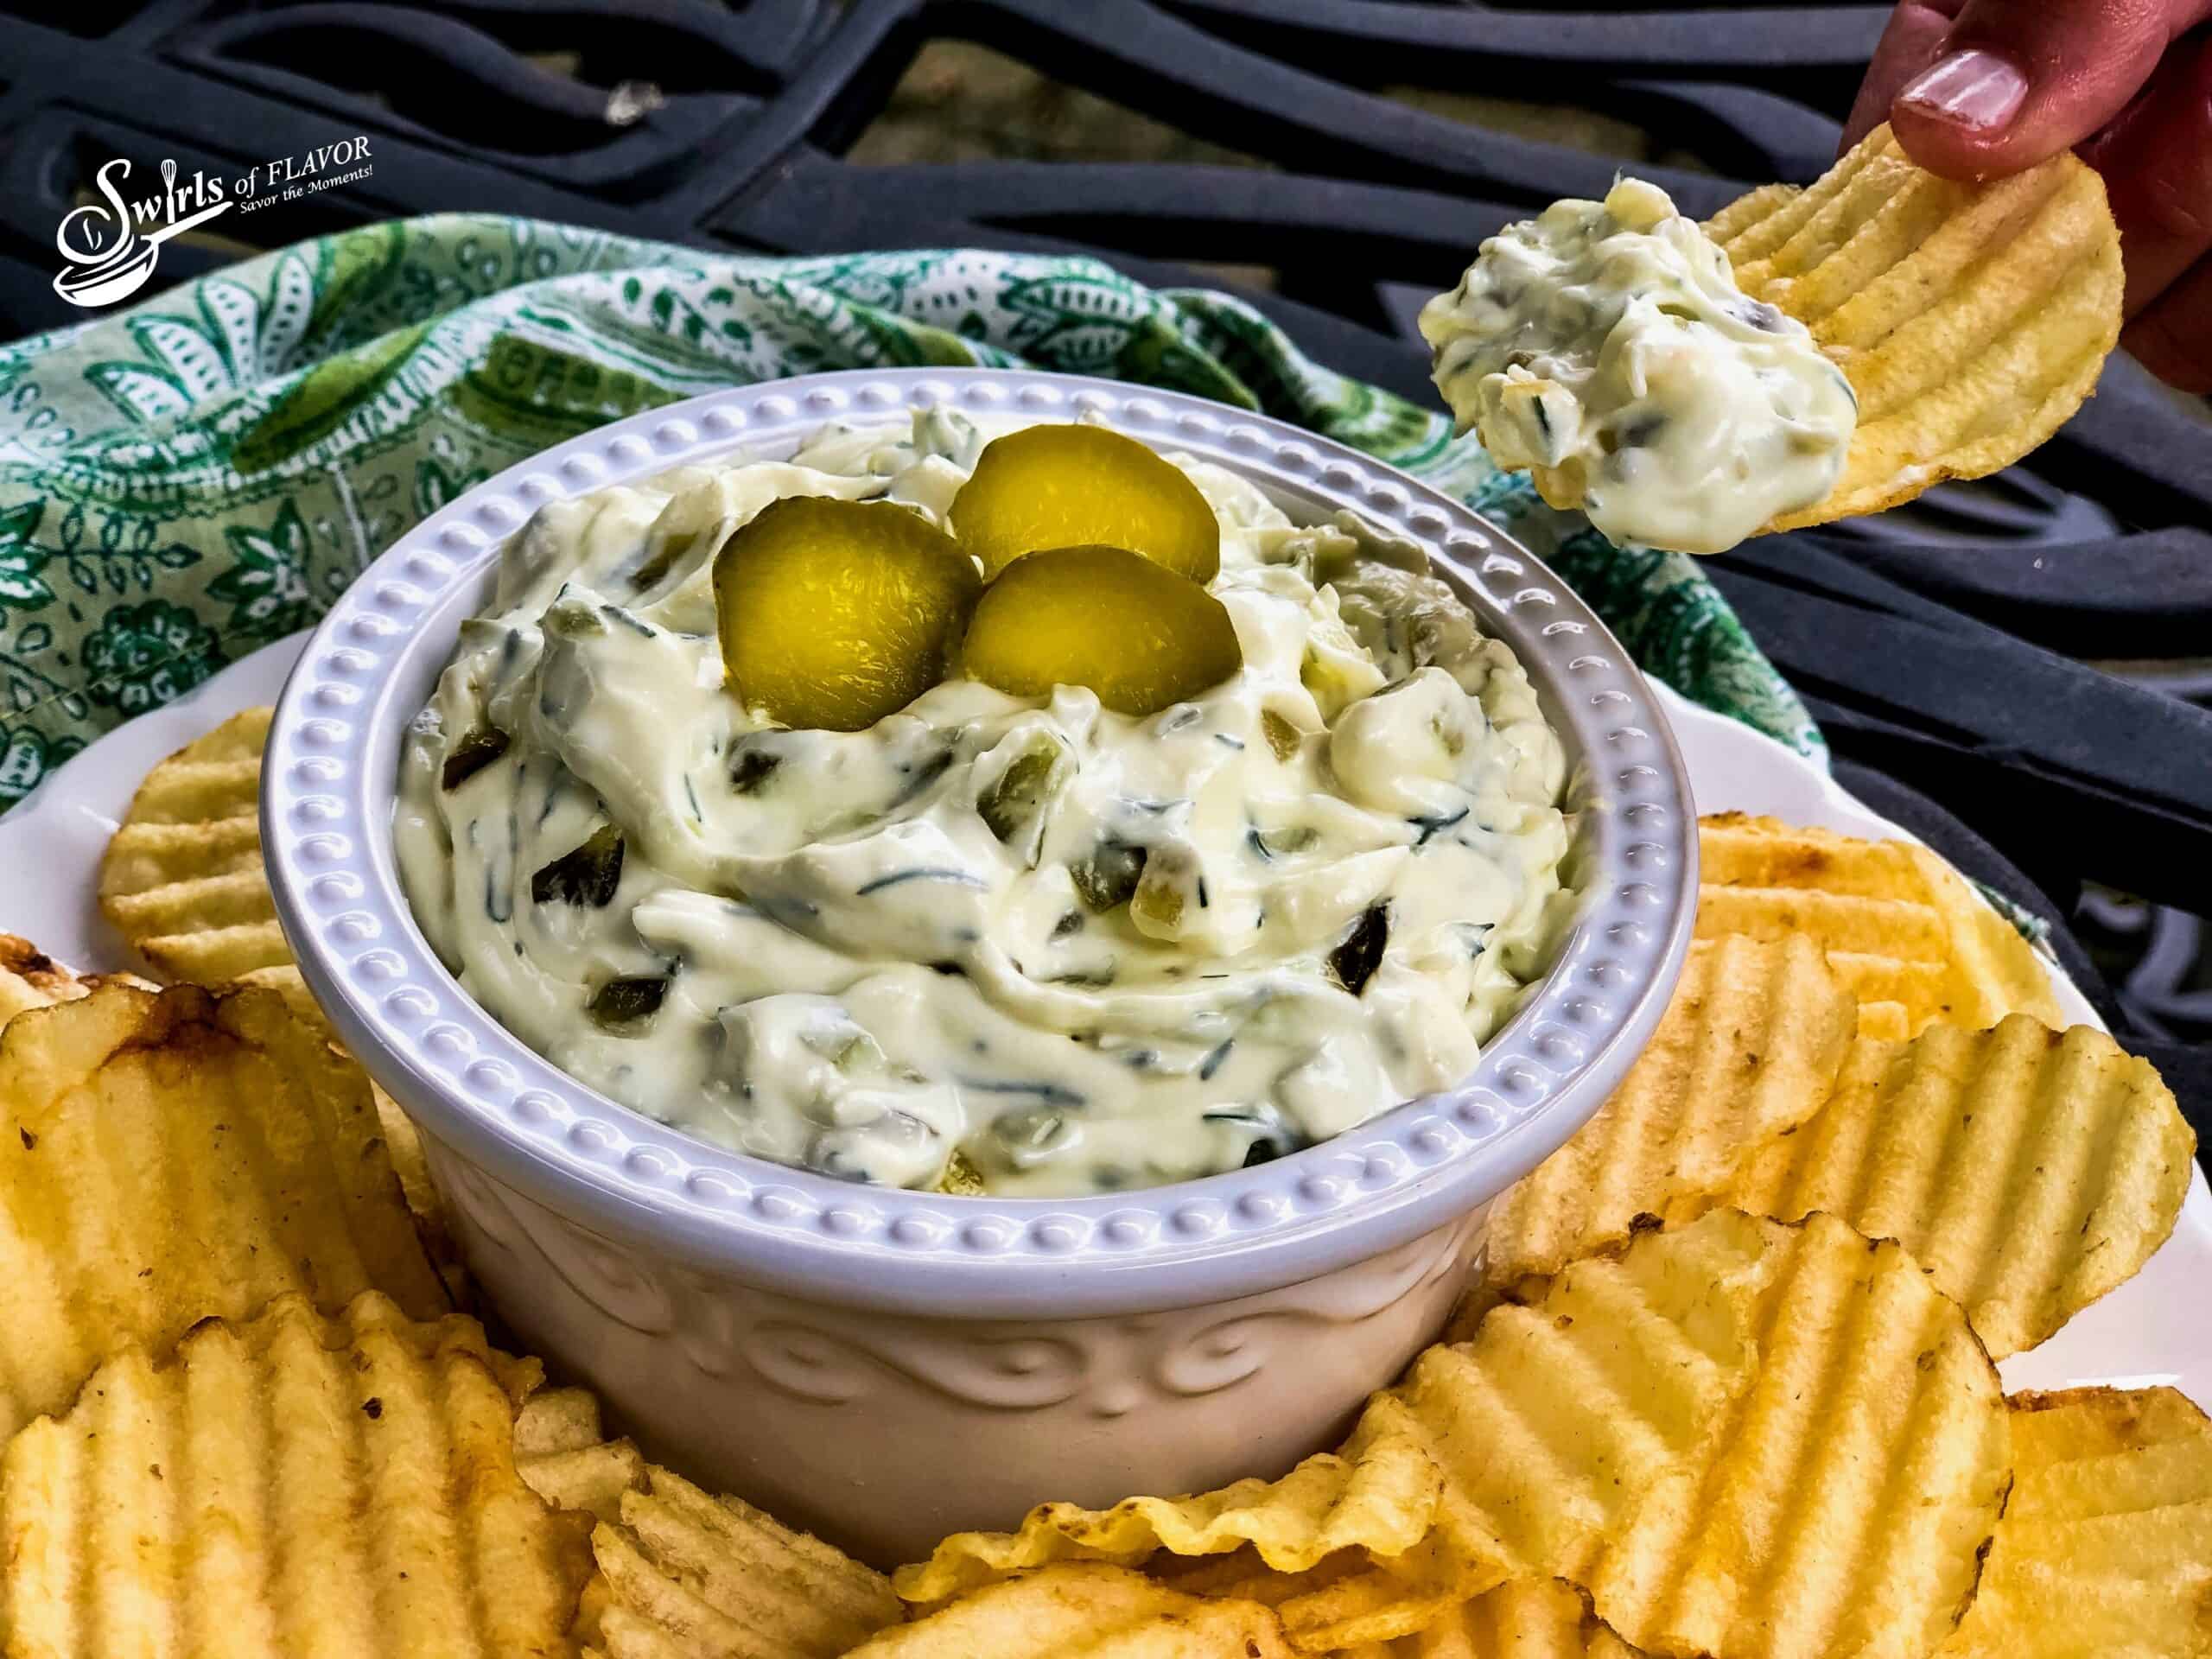 Dill pickle dip in a fancy ceramic bowl topped with 3 dill slices and surrounded by potato chips.